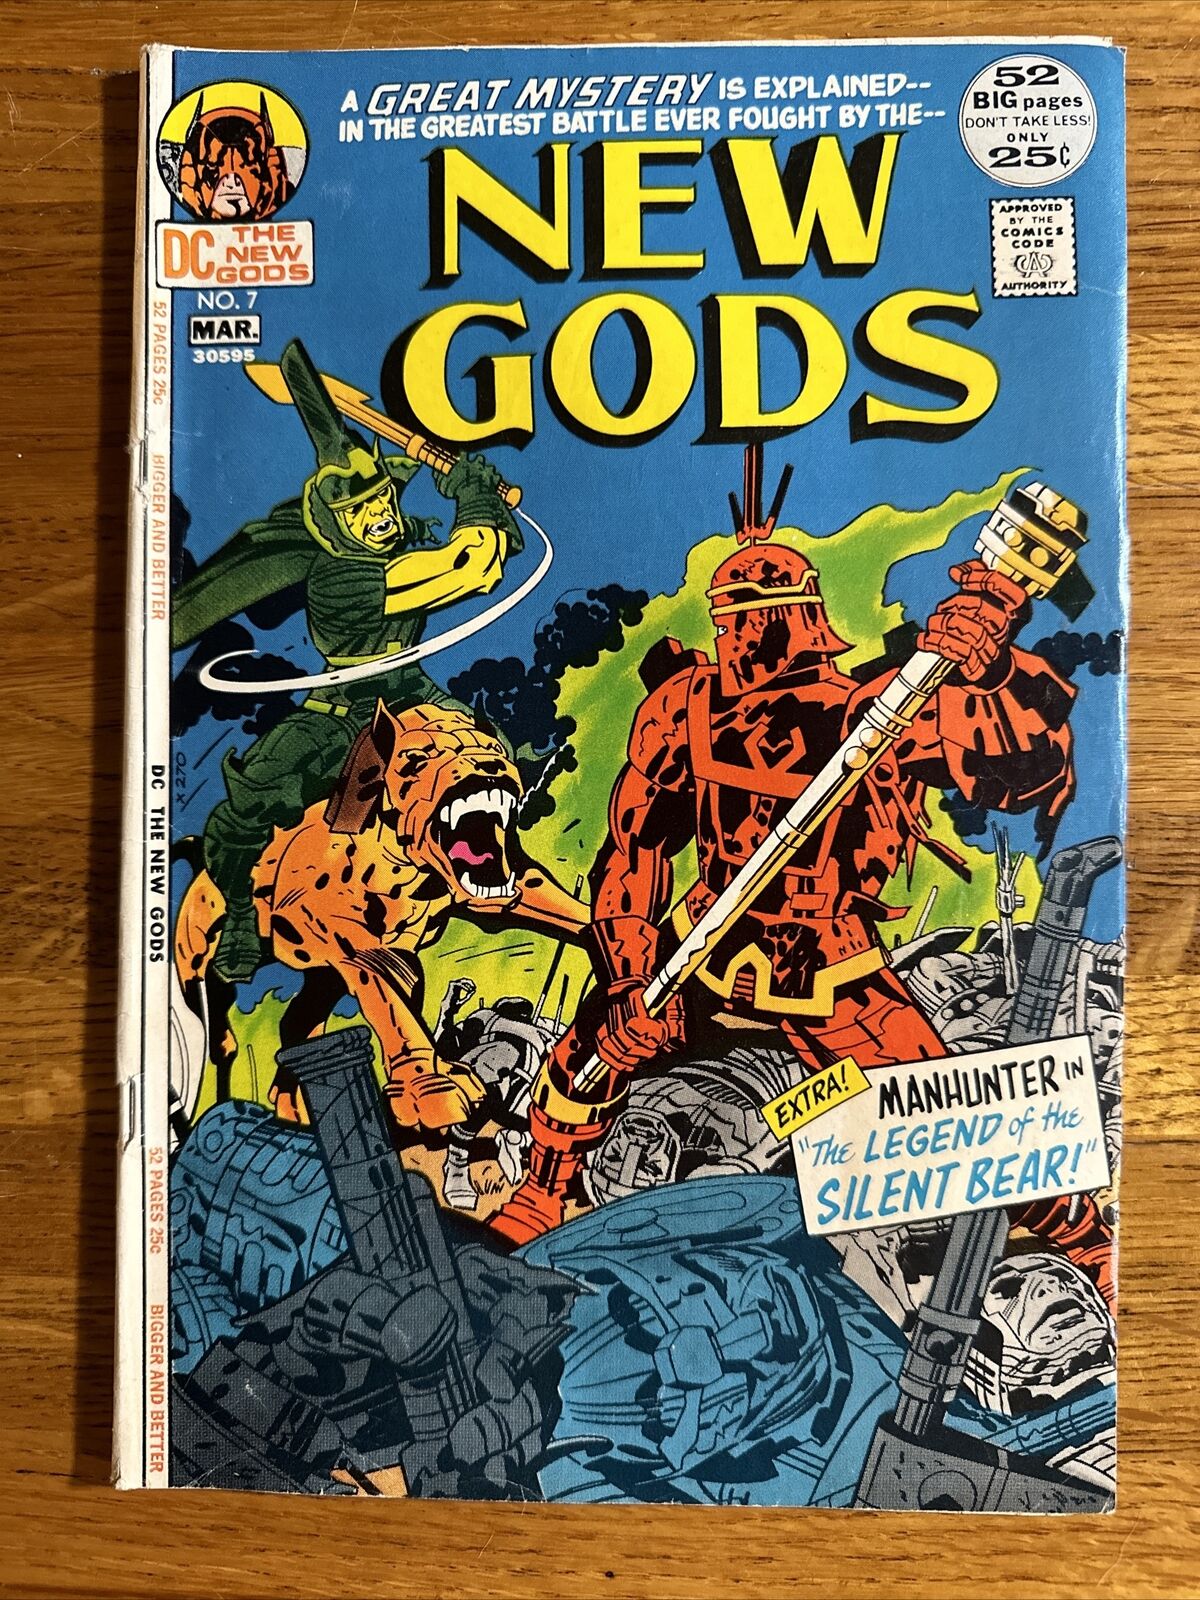 NEW GODS #7 1st Appearance of STEPPENWOLF, TIGRA & HEGGRA Comic Key Collectible